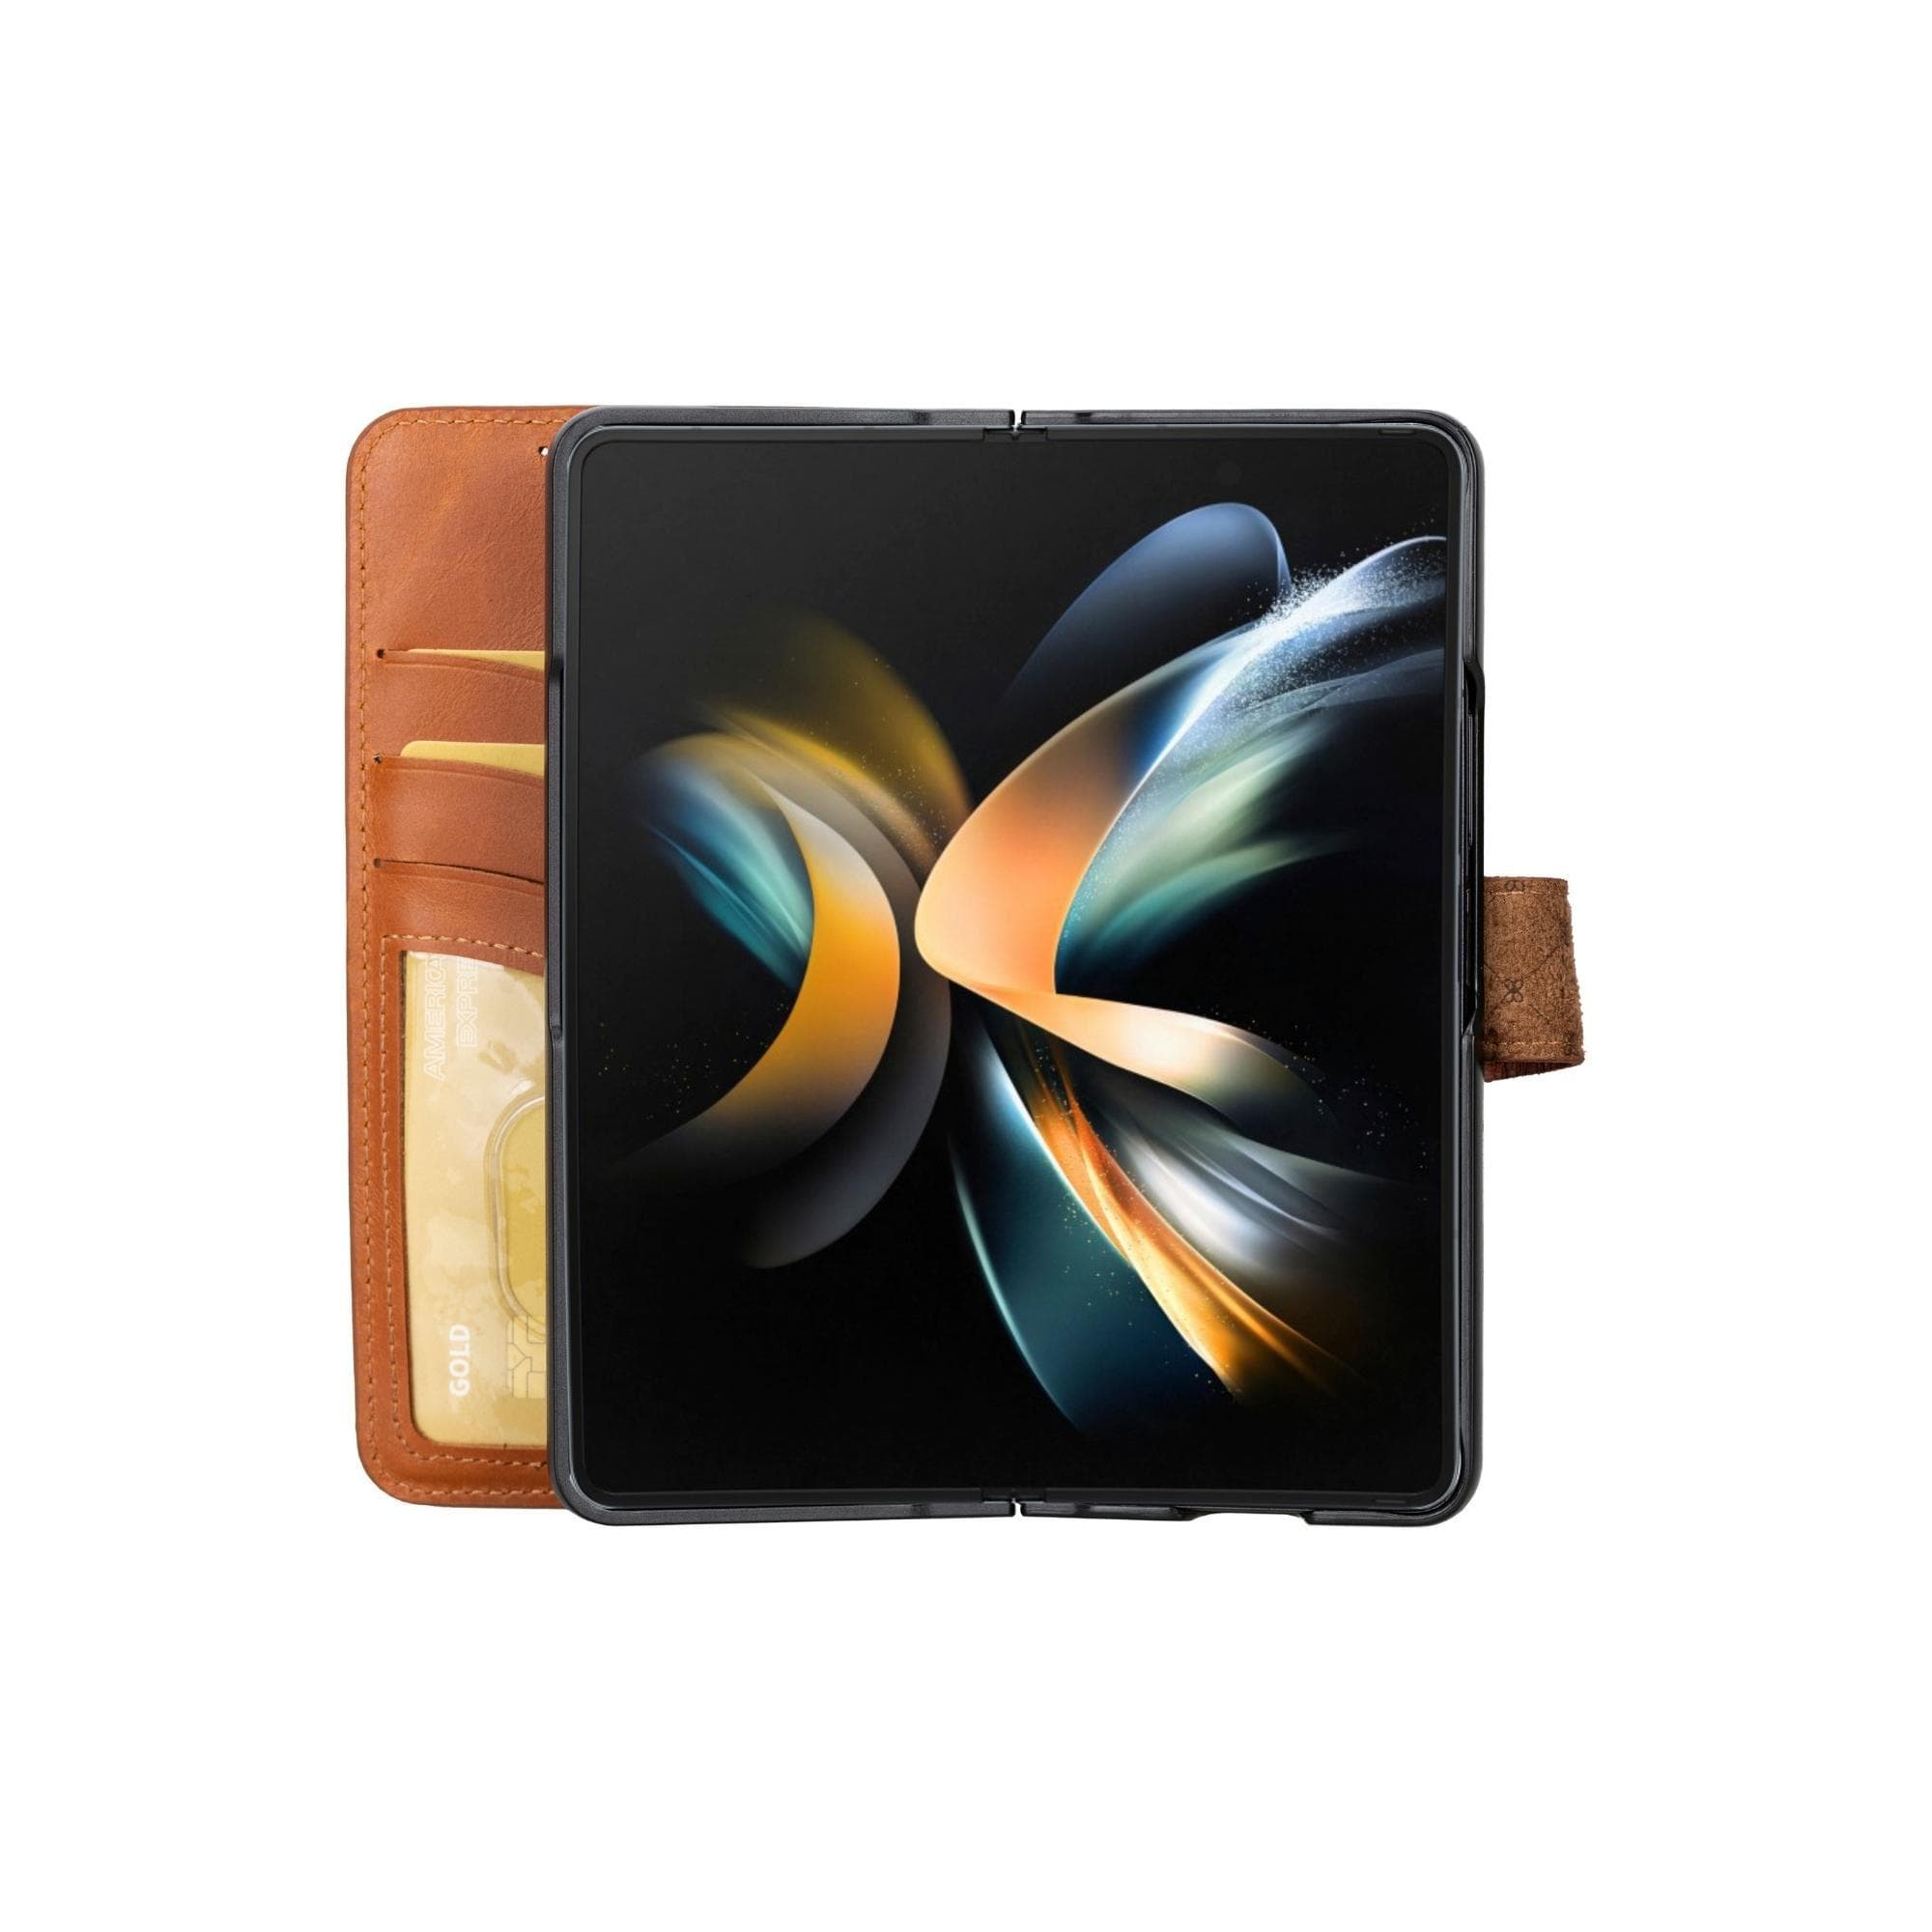 How to preorder the Samsung Galaxy Z Fold 5